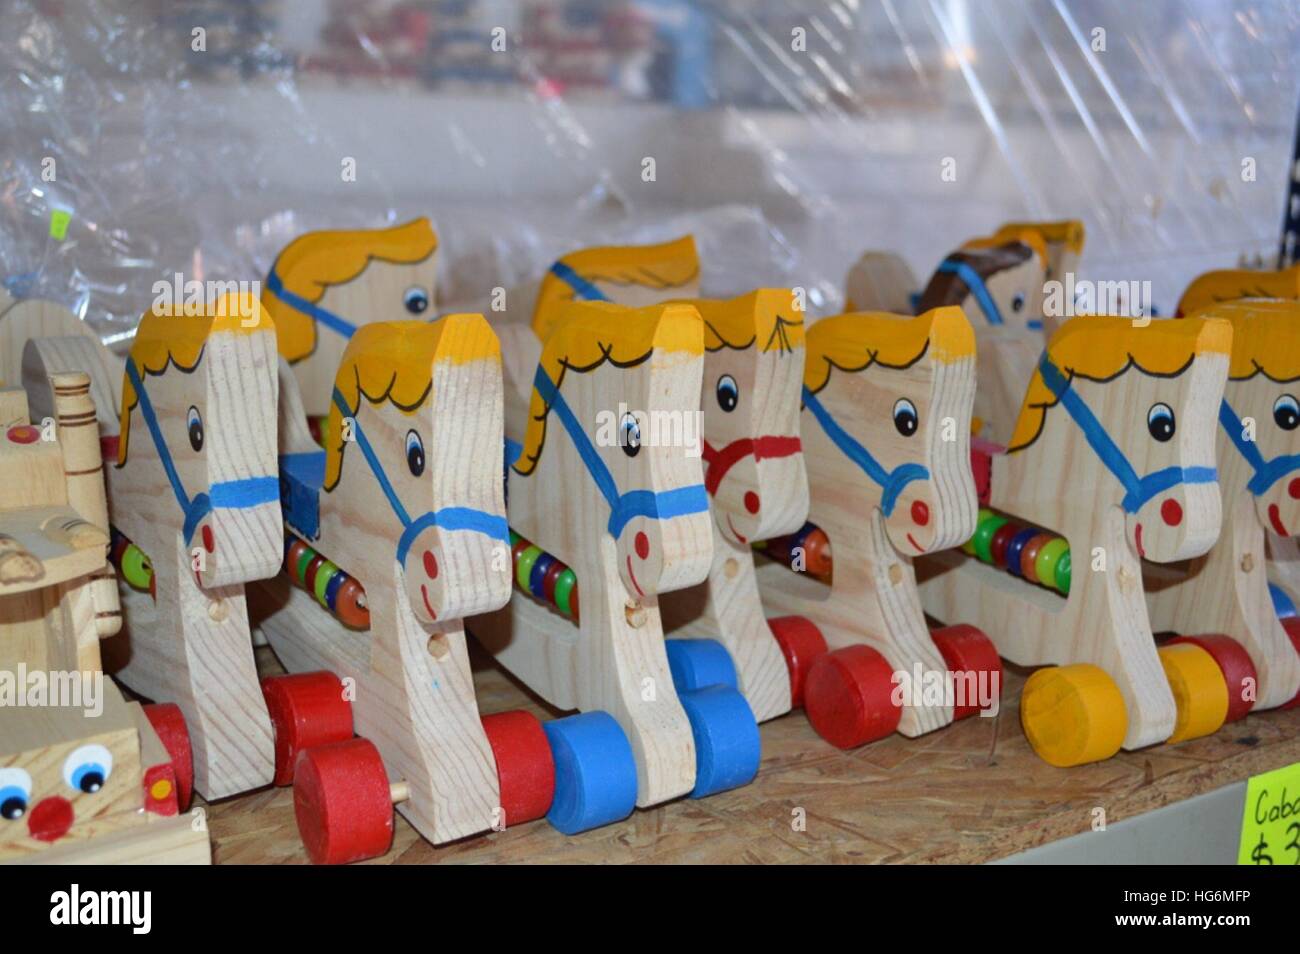 San Antonio La Isla. 5th Jan, 2017. Photo taken on Jan. 5, 2017 shows the wooden horses for sale at a shop in San Antonio la Isla municipality, in the State of Mexico, Mexico. Woodcrafts have been passed through at least three generations in the municipality for toy making. © Str/Xinhua/Alamy Live News Stock Photo